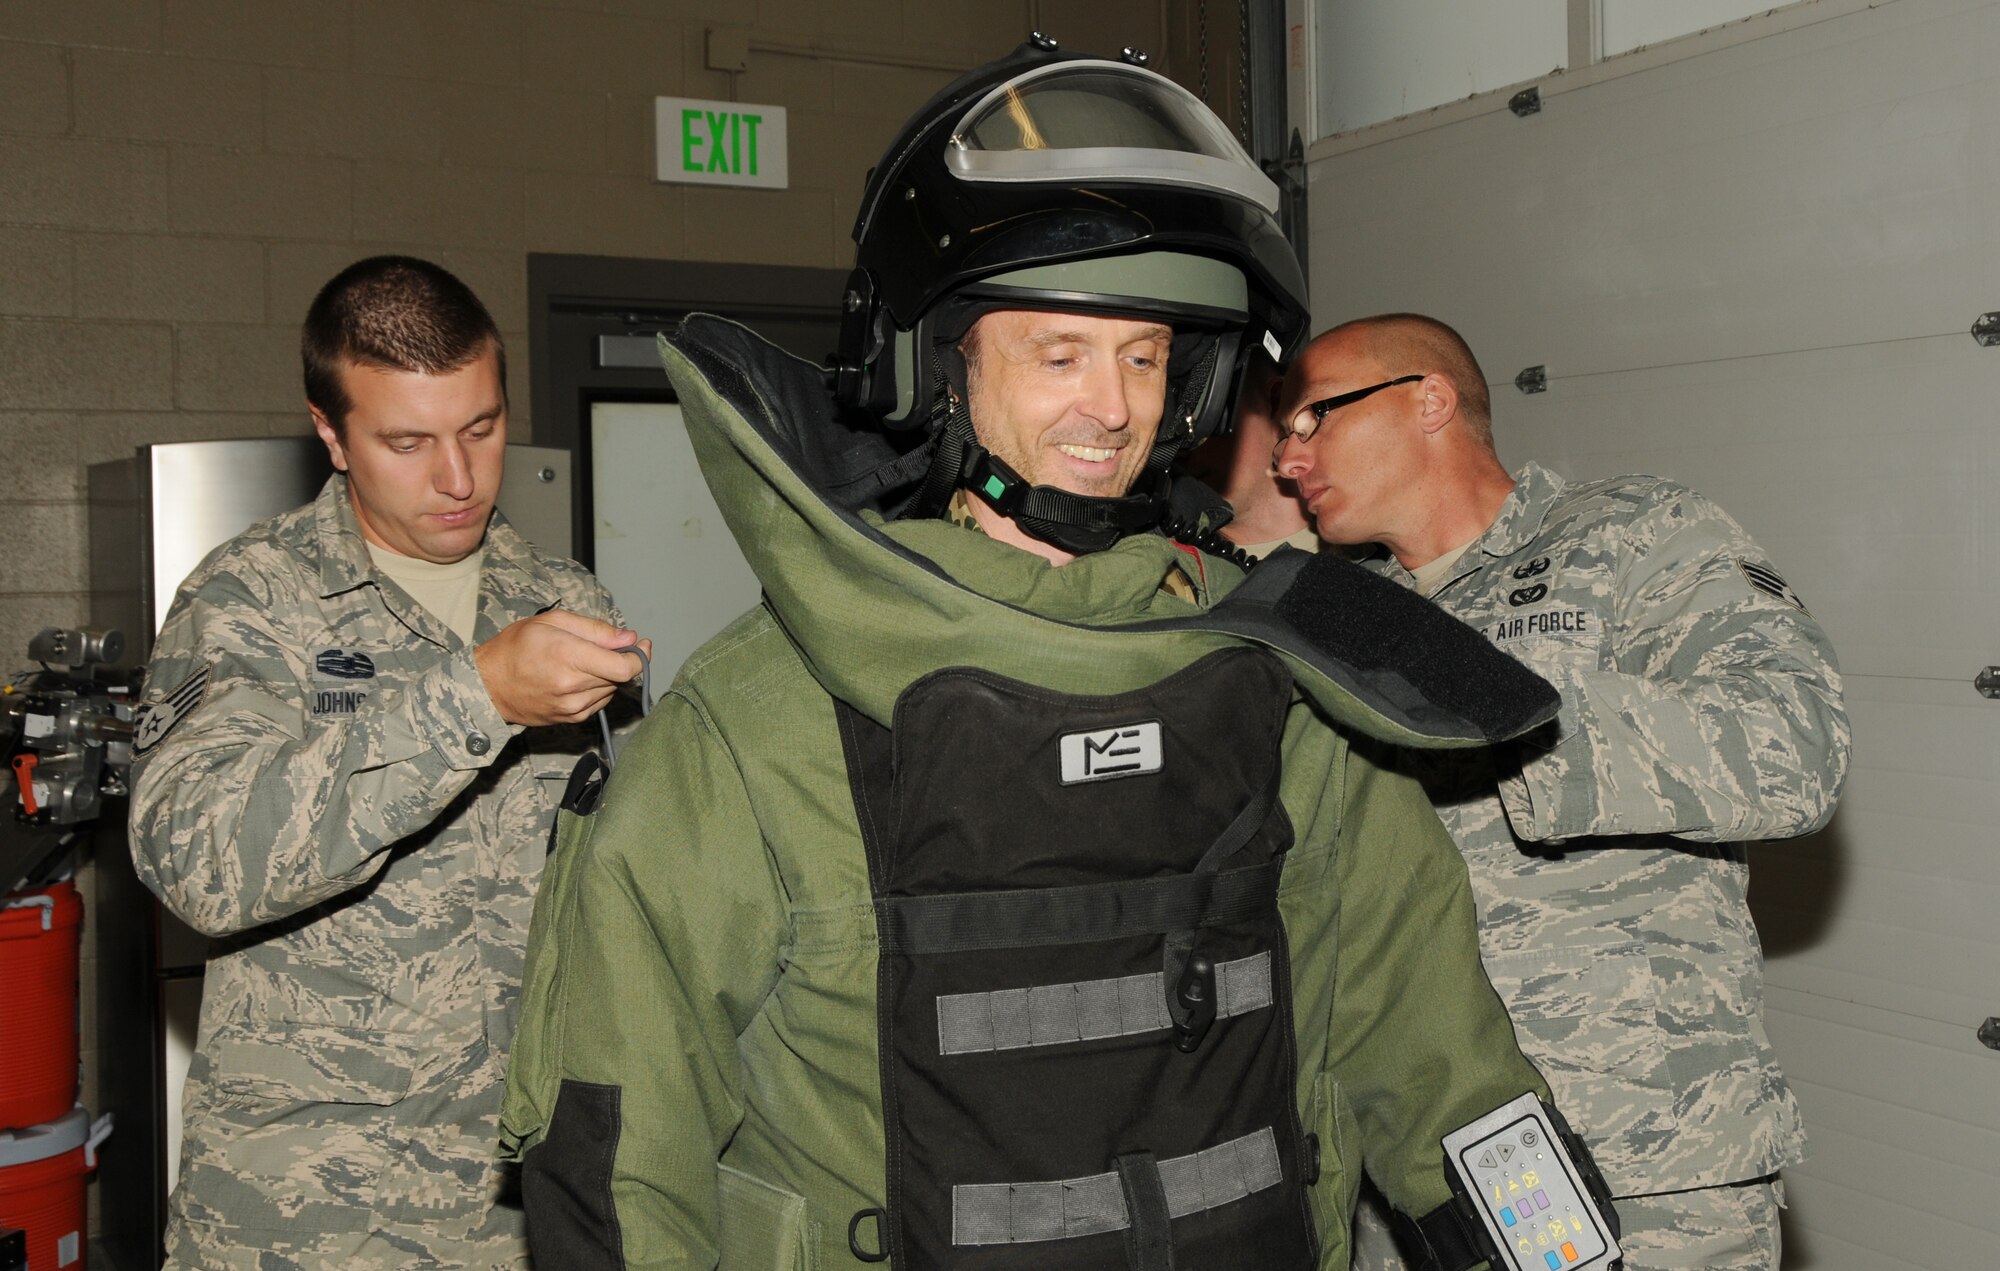 Staff Sgt. Chris Johnson (left) and Senior Airman Chris Cunningham (right), explosive ordnance disposal technicians with the 151st Civil Engineering Squadron, put a bomb suit on Lt. Col. Timo Diegmueller during his tour of the Utah Air National Guard EOD unit. Diegmueller, a Reserve intelligence officer with the German Air Force, visited the Air Guard Base in Salt Lake City while participating in the Department of Defense Reserve Officers Foreign Exchange Program. (Utah Air National Guard Photo by Staff Sgt. Annie Edwards/RELEASED)